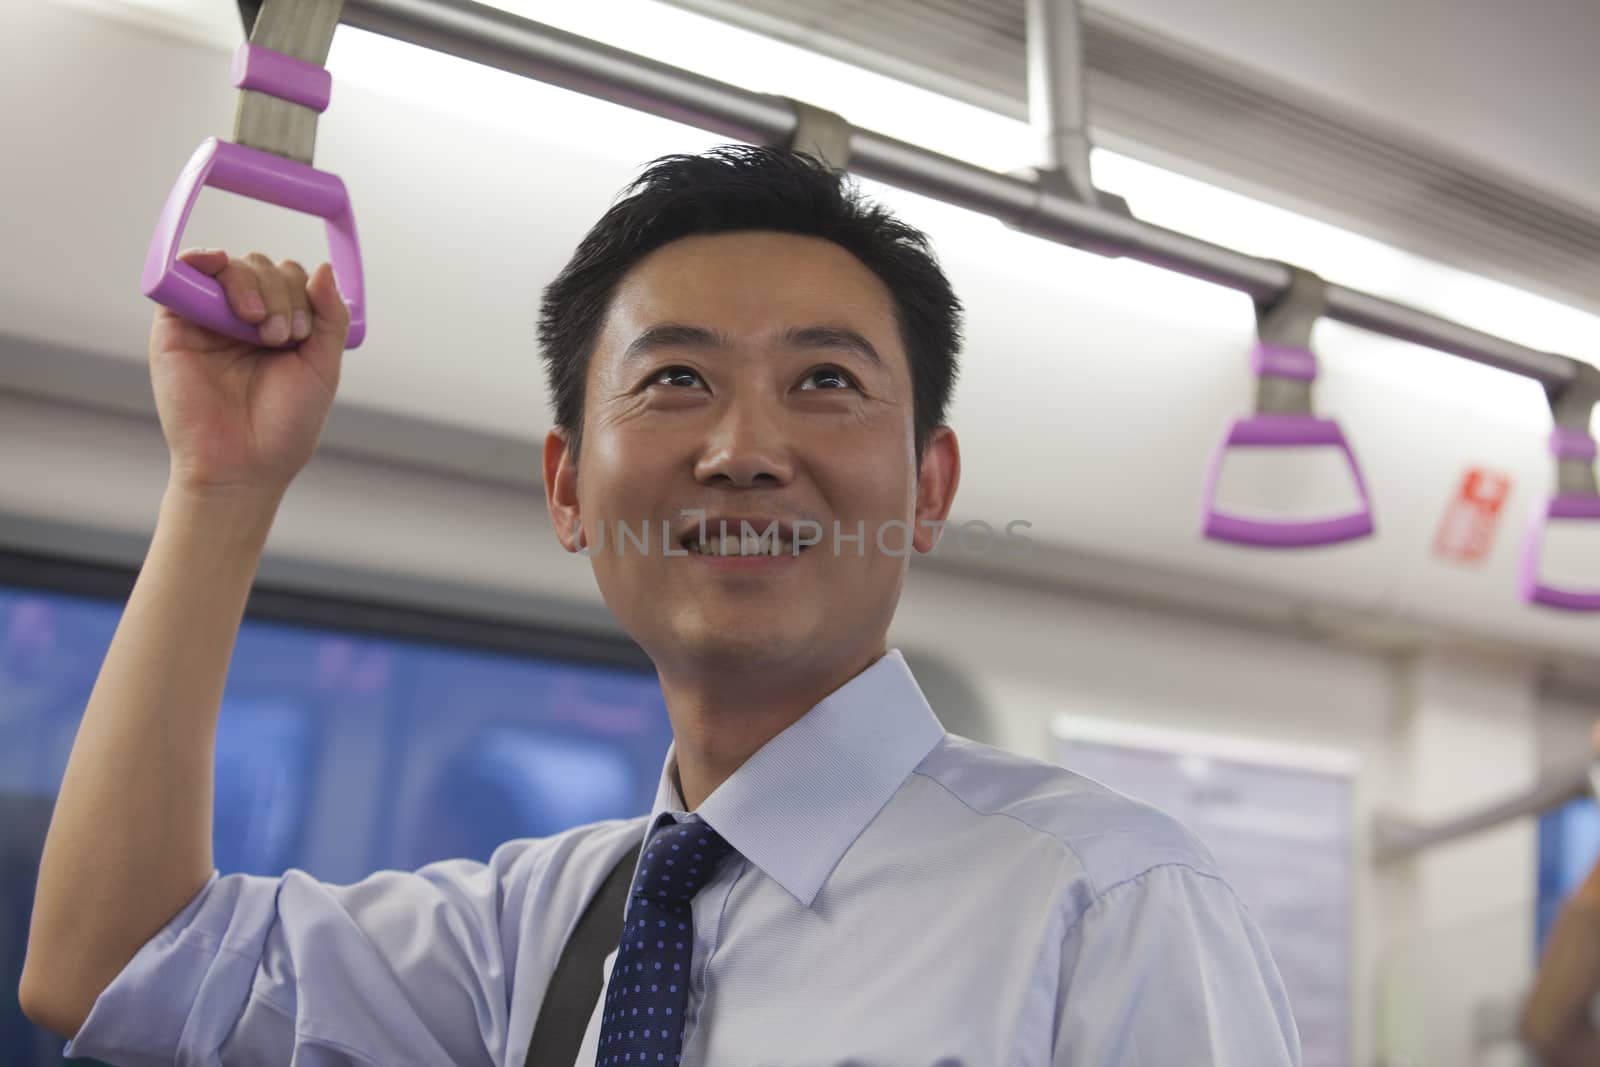 Businessman smiling in the subway